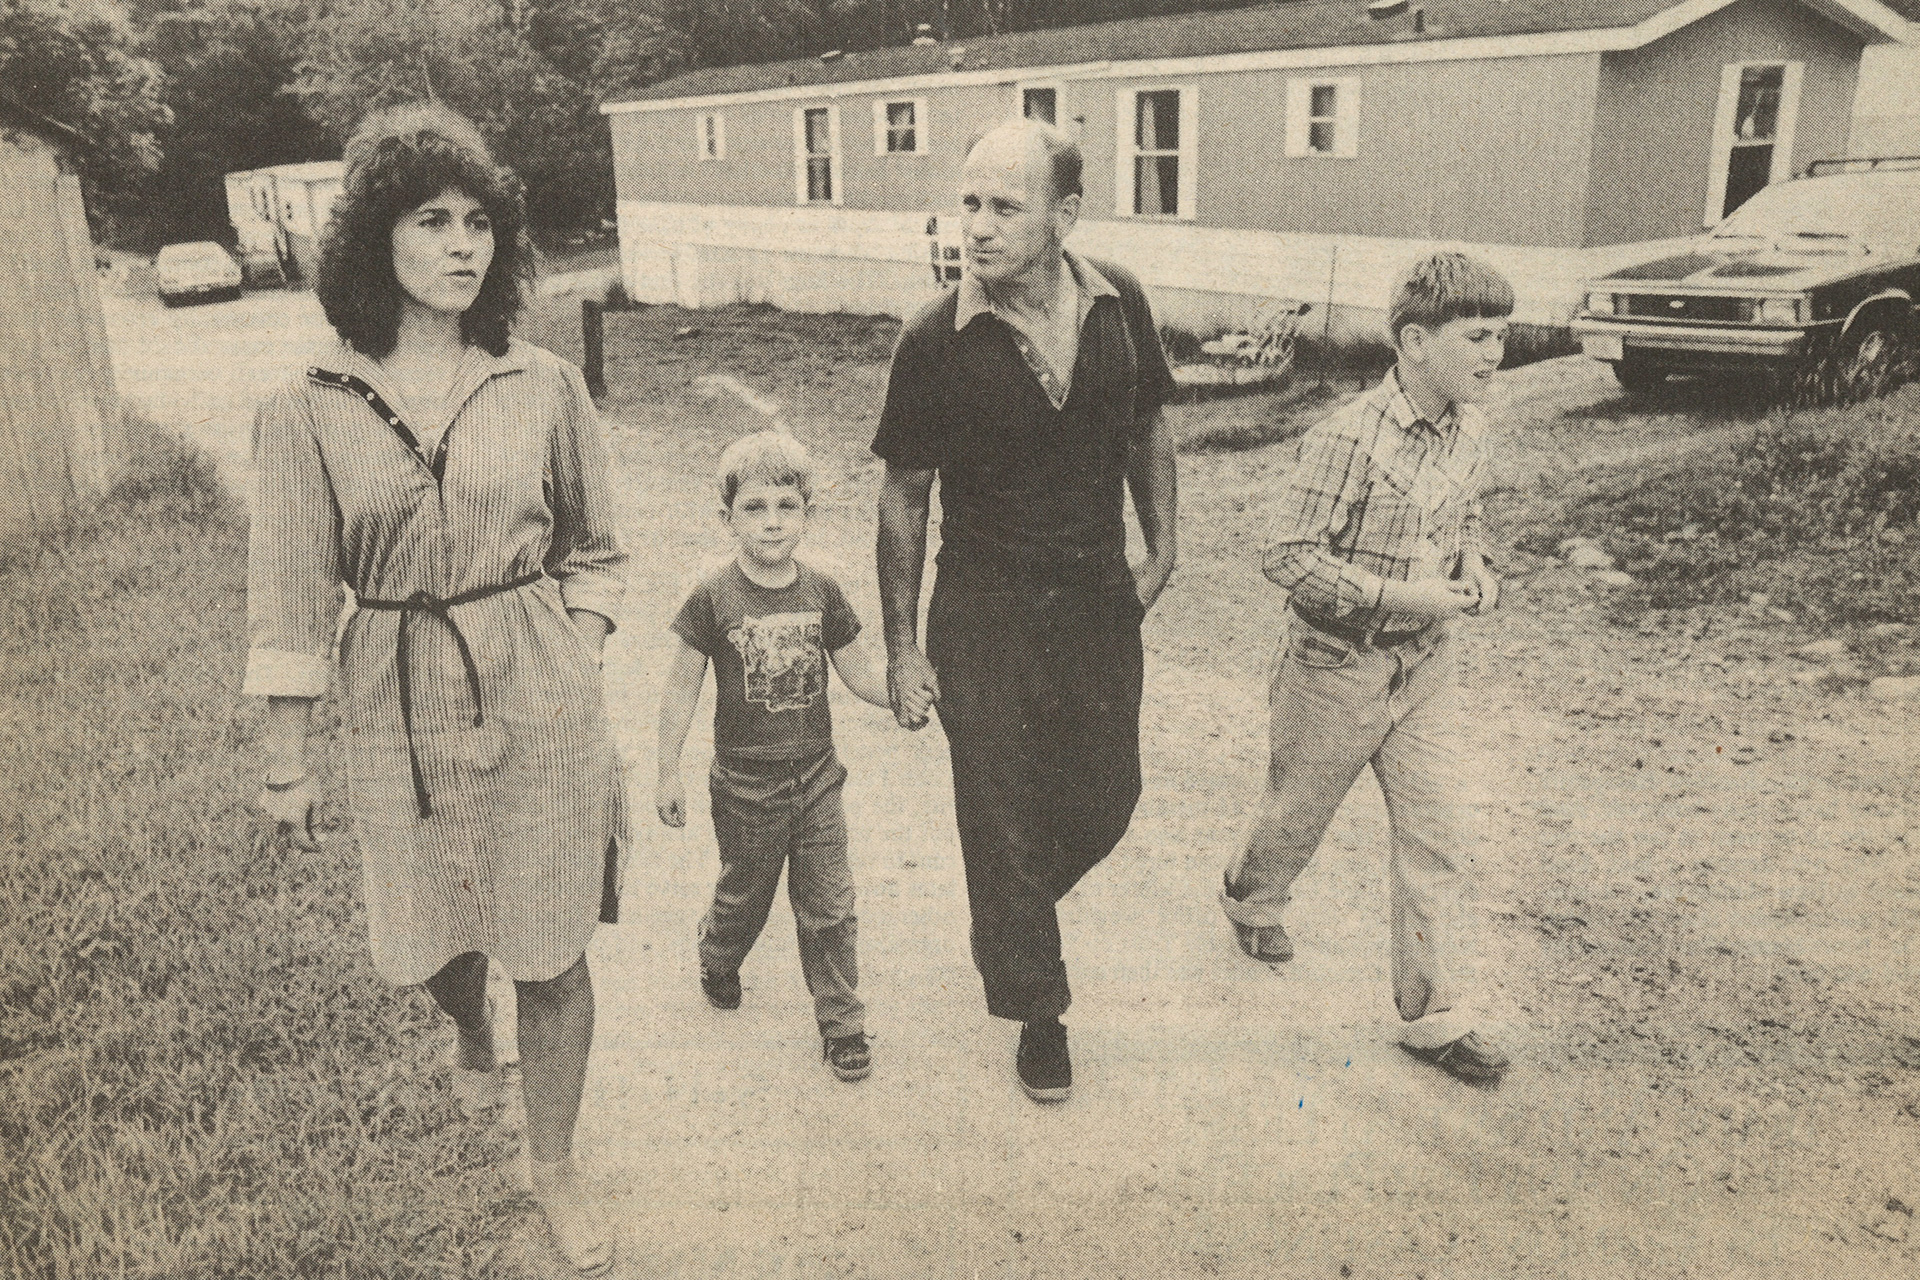 Black and white newspaper photo of a woman walking on gravel street with a man and two young boys